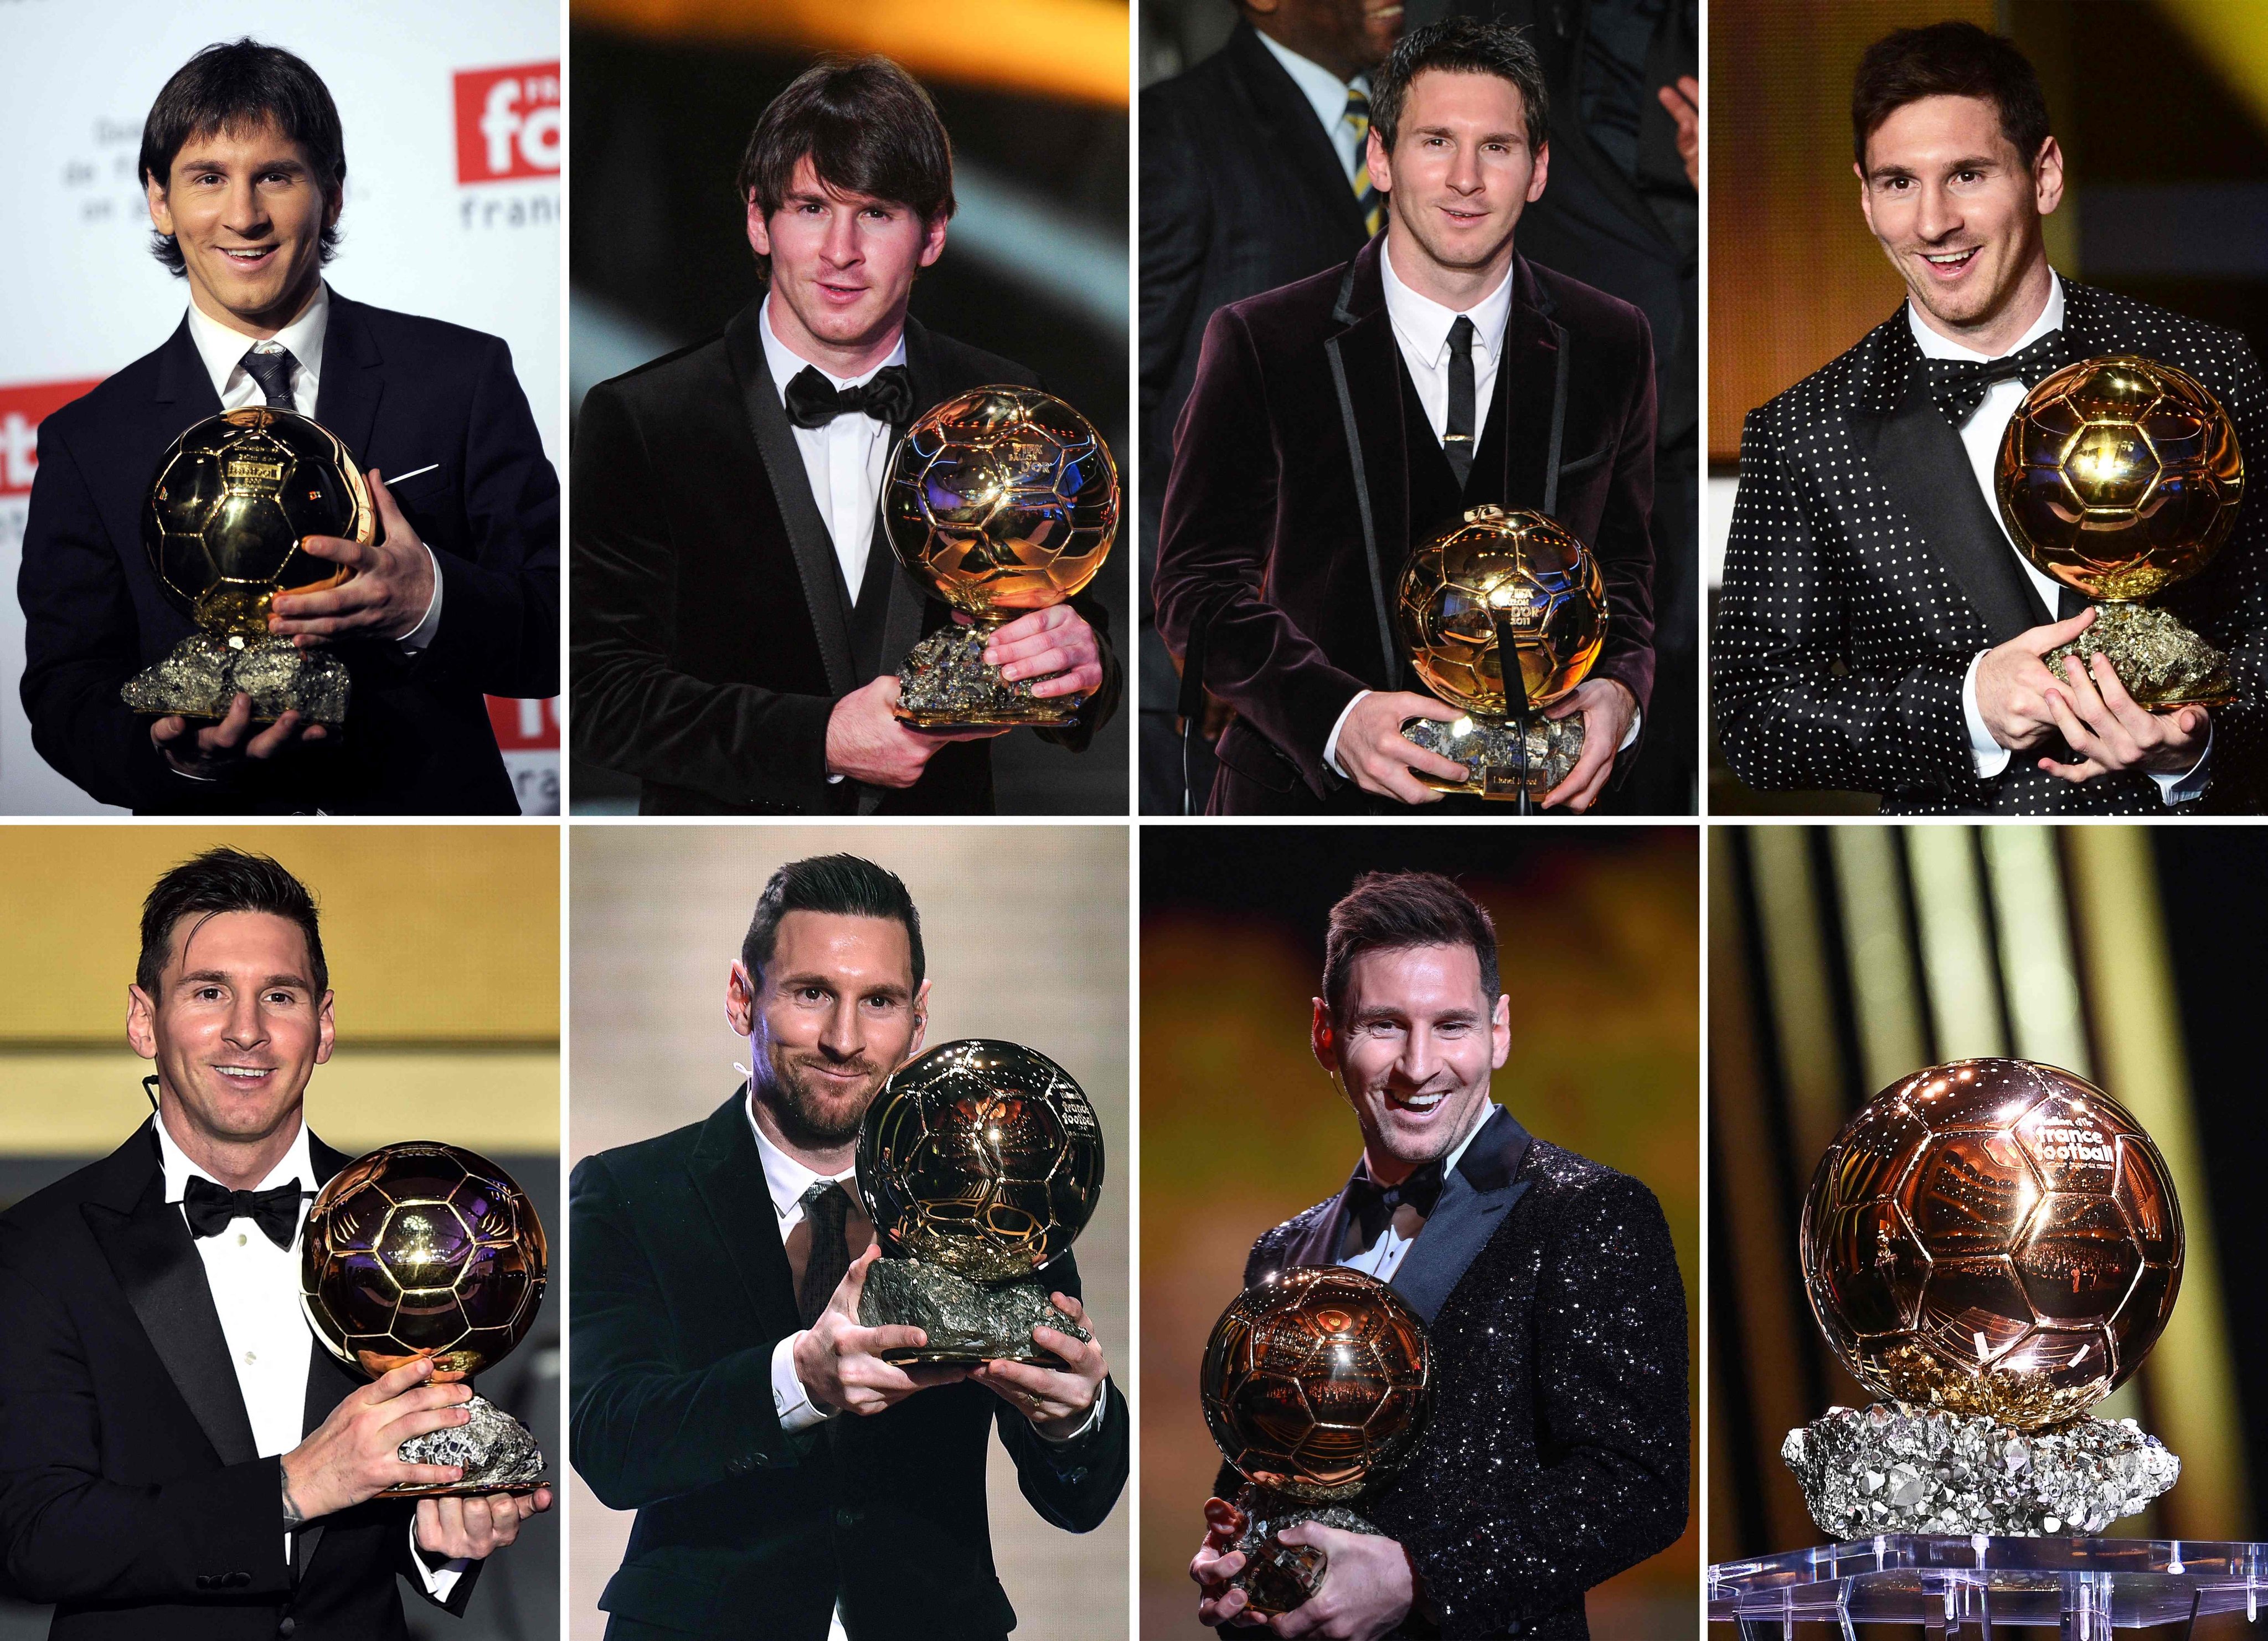 Lionel Messi won the men’s Ballon d’Or award for a record-extending seventh time in Paris. Photo: AFP